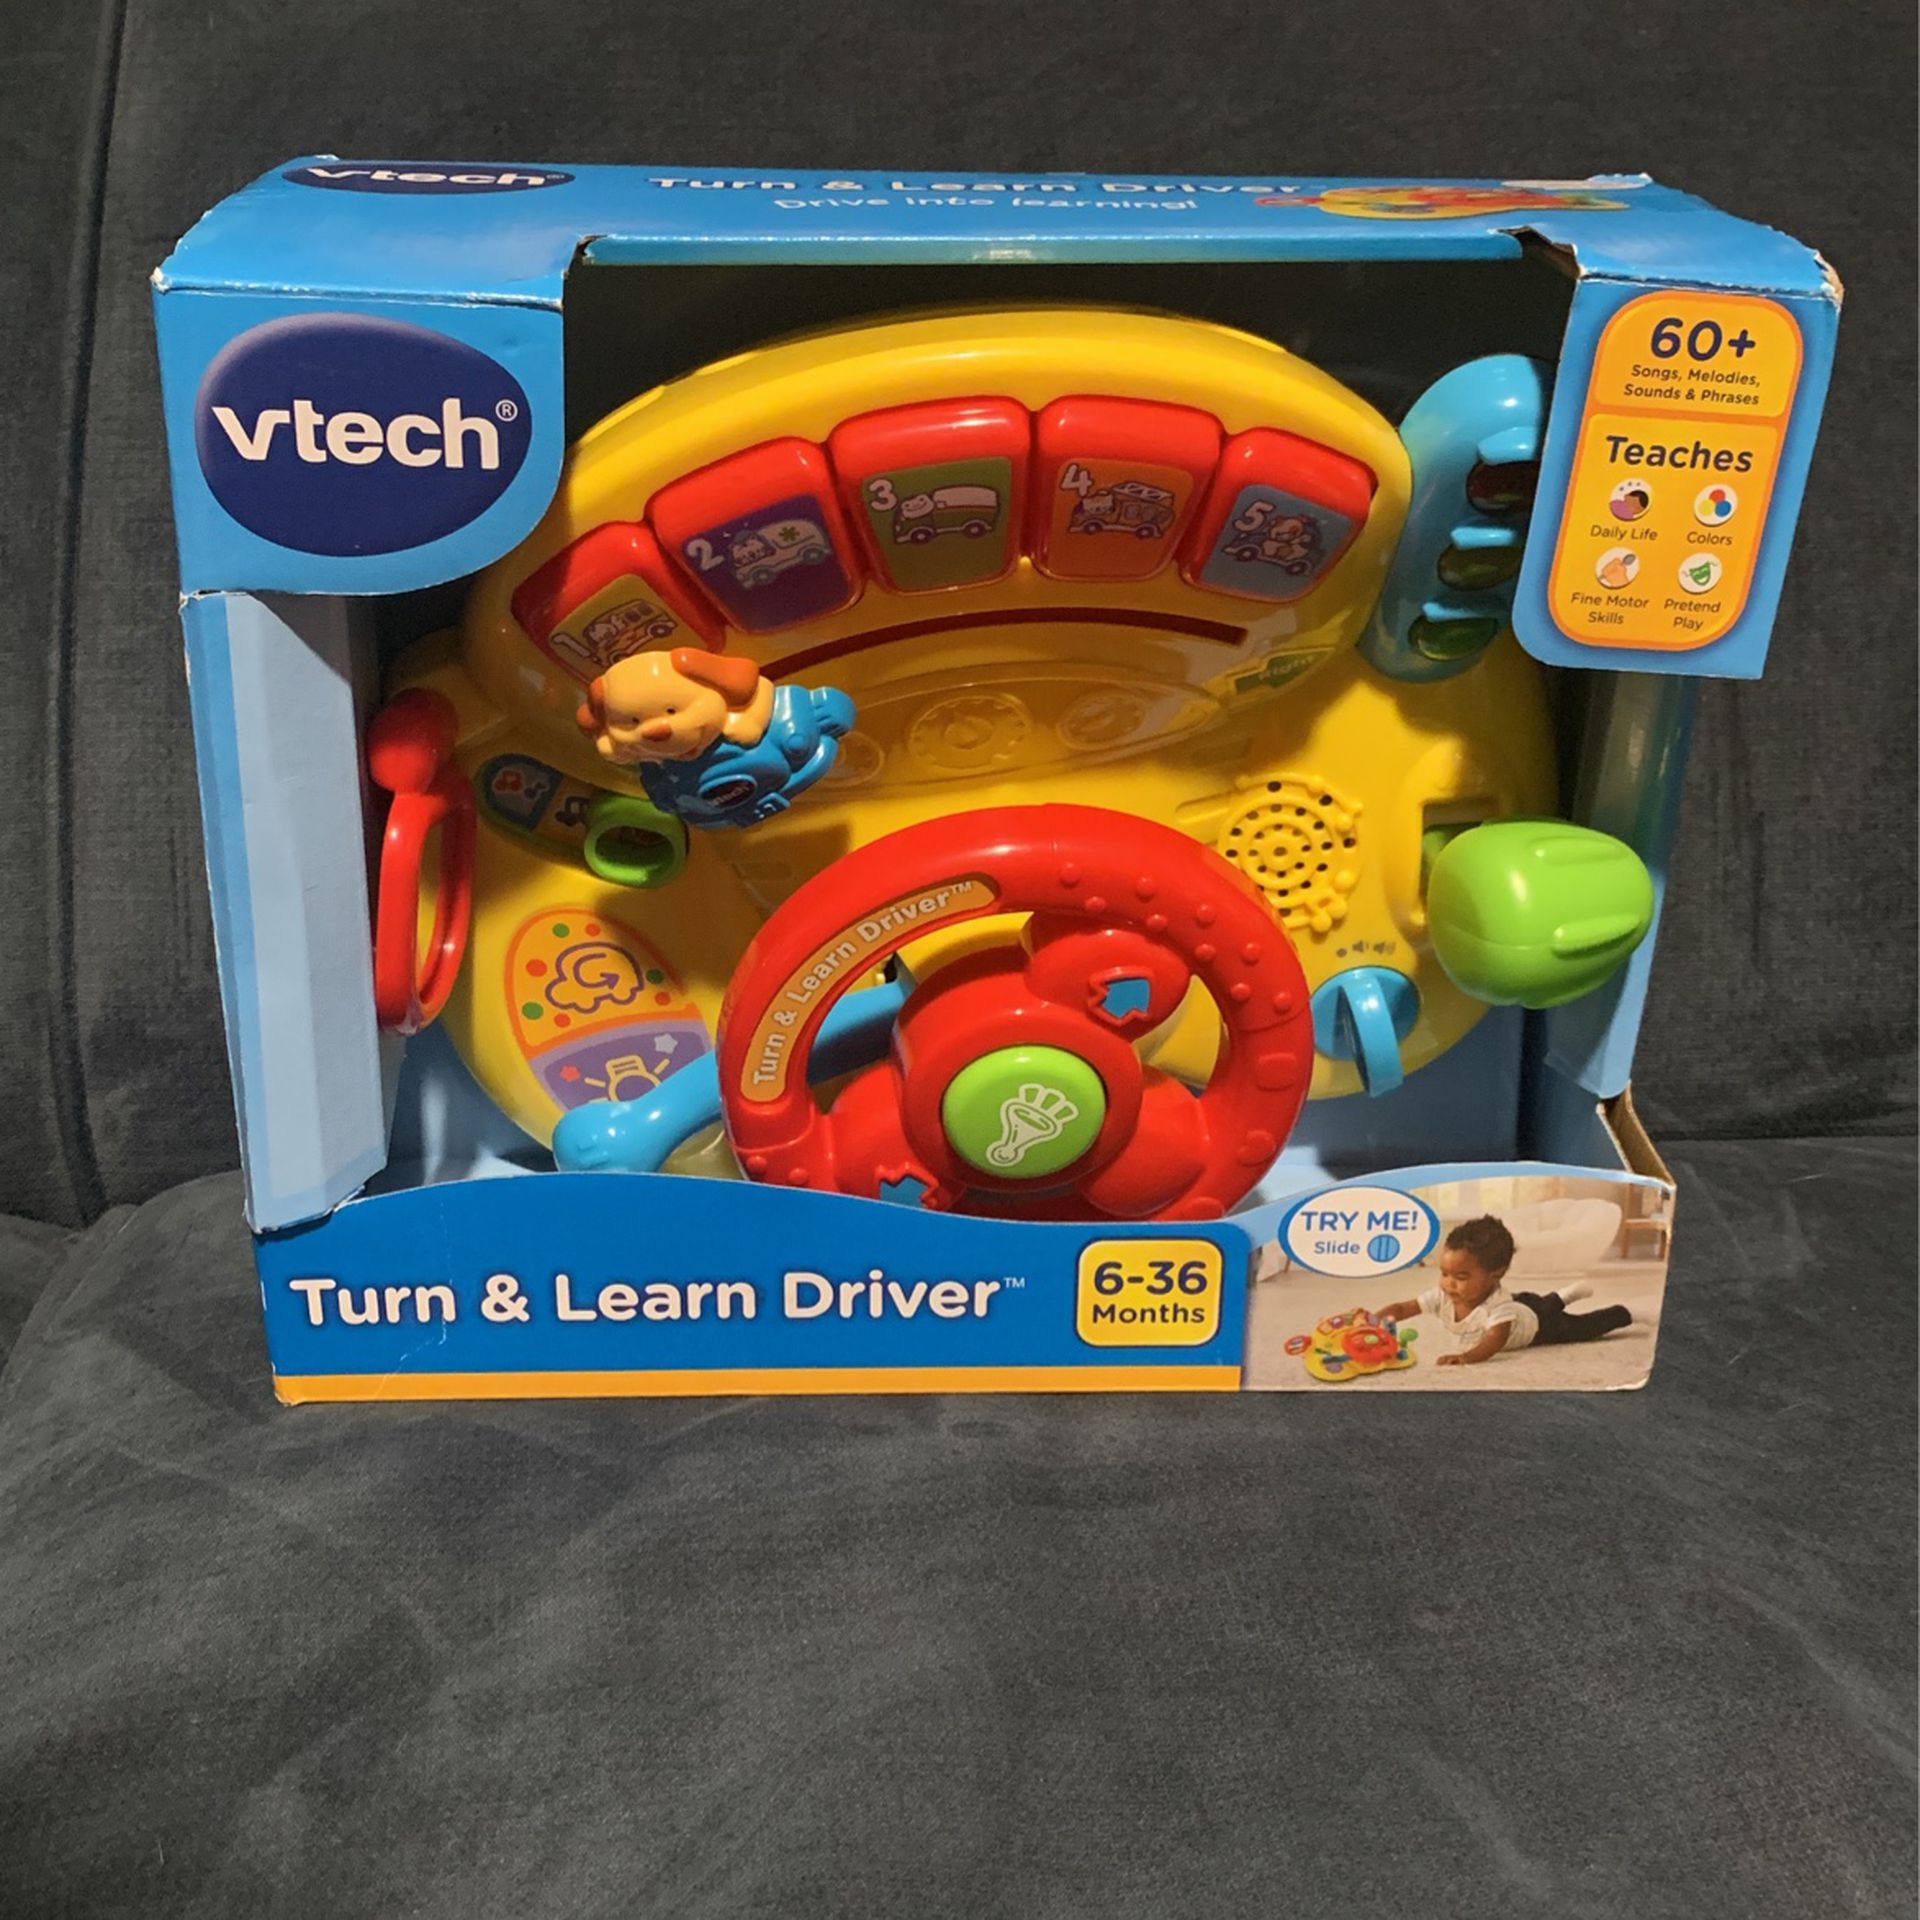 New In Box Vtech Turn And Learn Driver